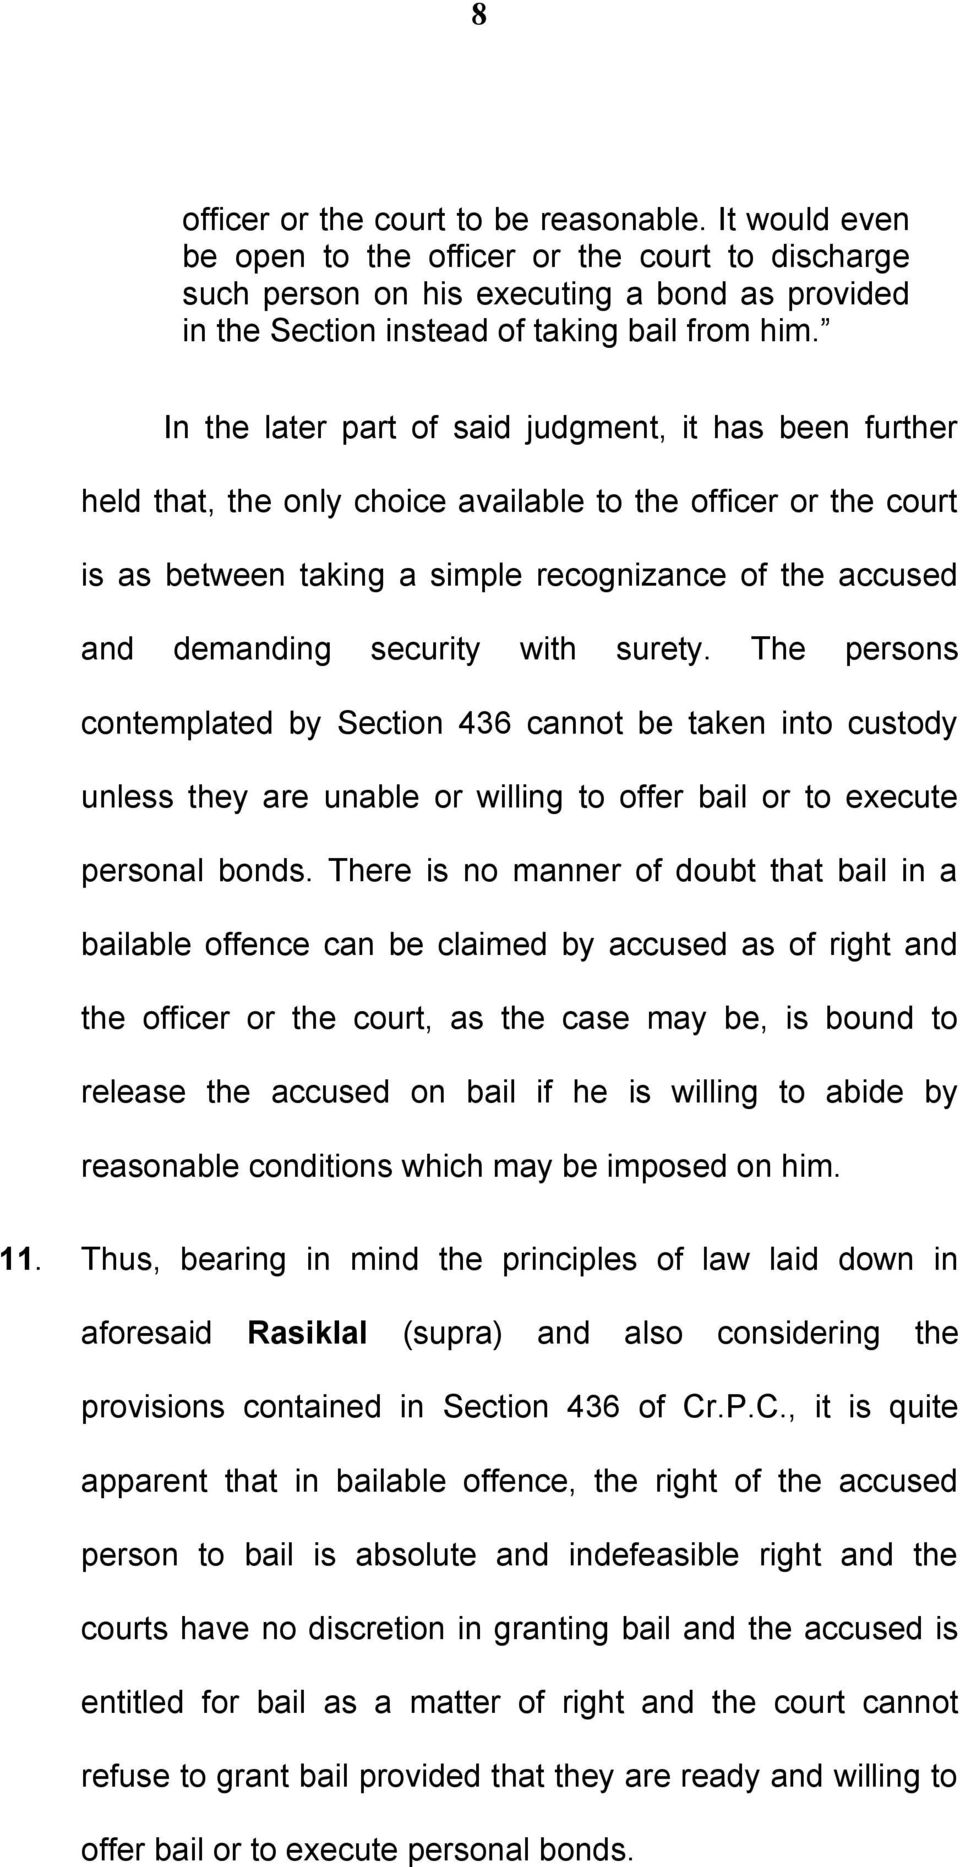 security with surety. The persons contemplated by Section 436 cannot be taken into custody unless they are unable or willing to offer bail or to execute personal bonds.